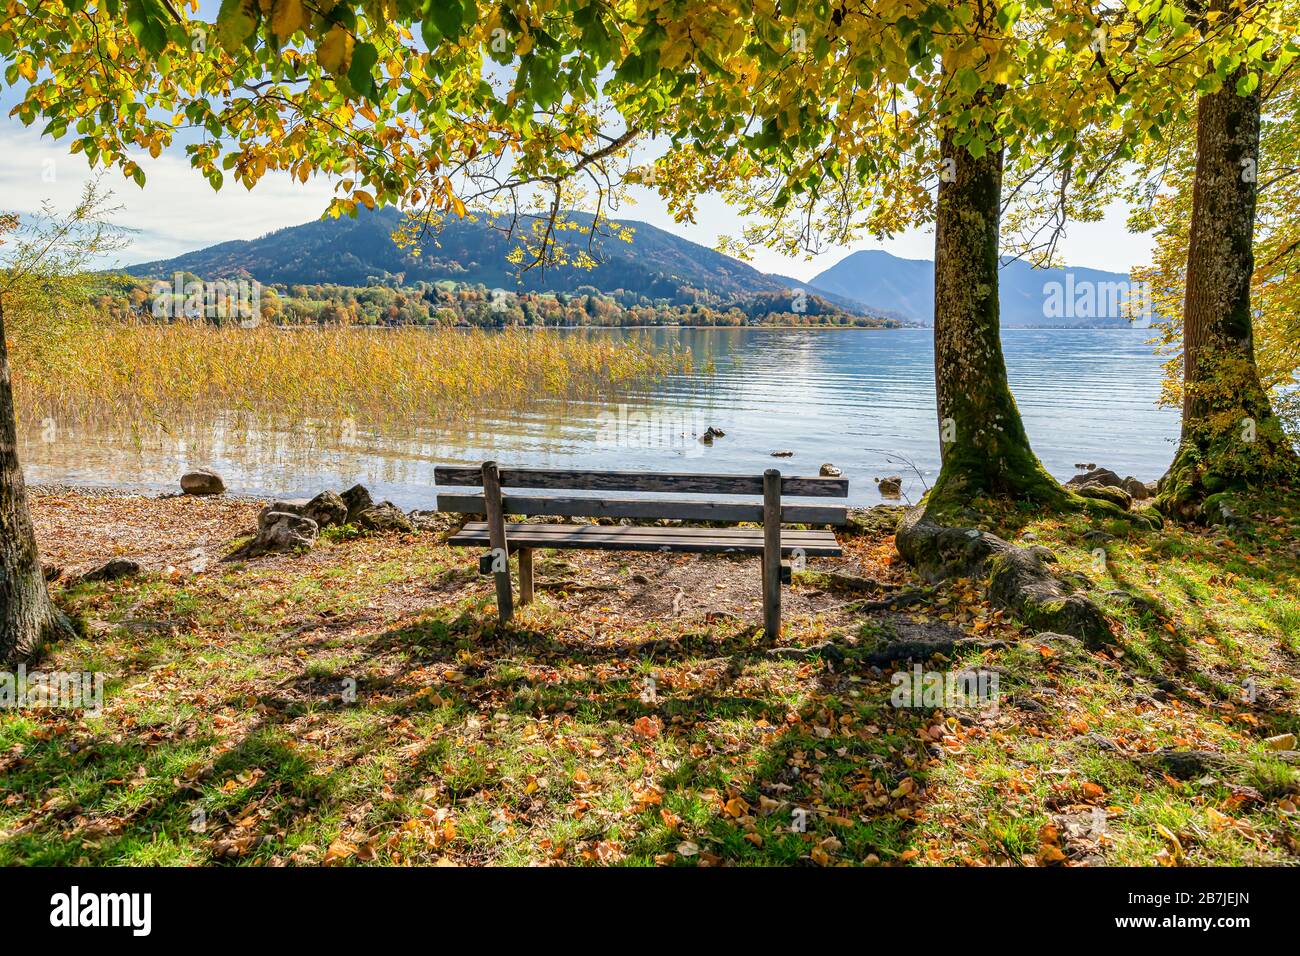 Idyllic place for regeneration, a bench nearby a lake. Stock Photo